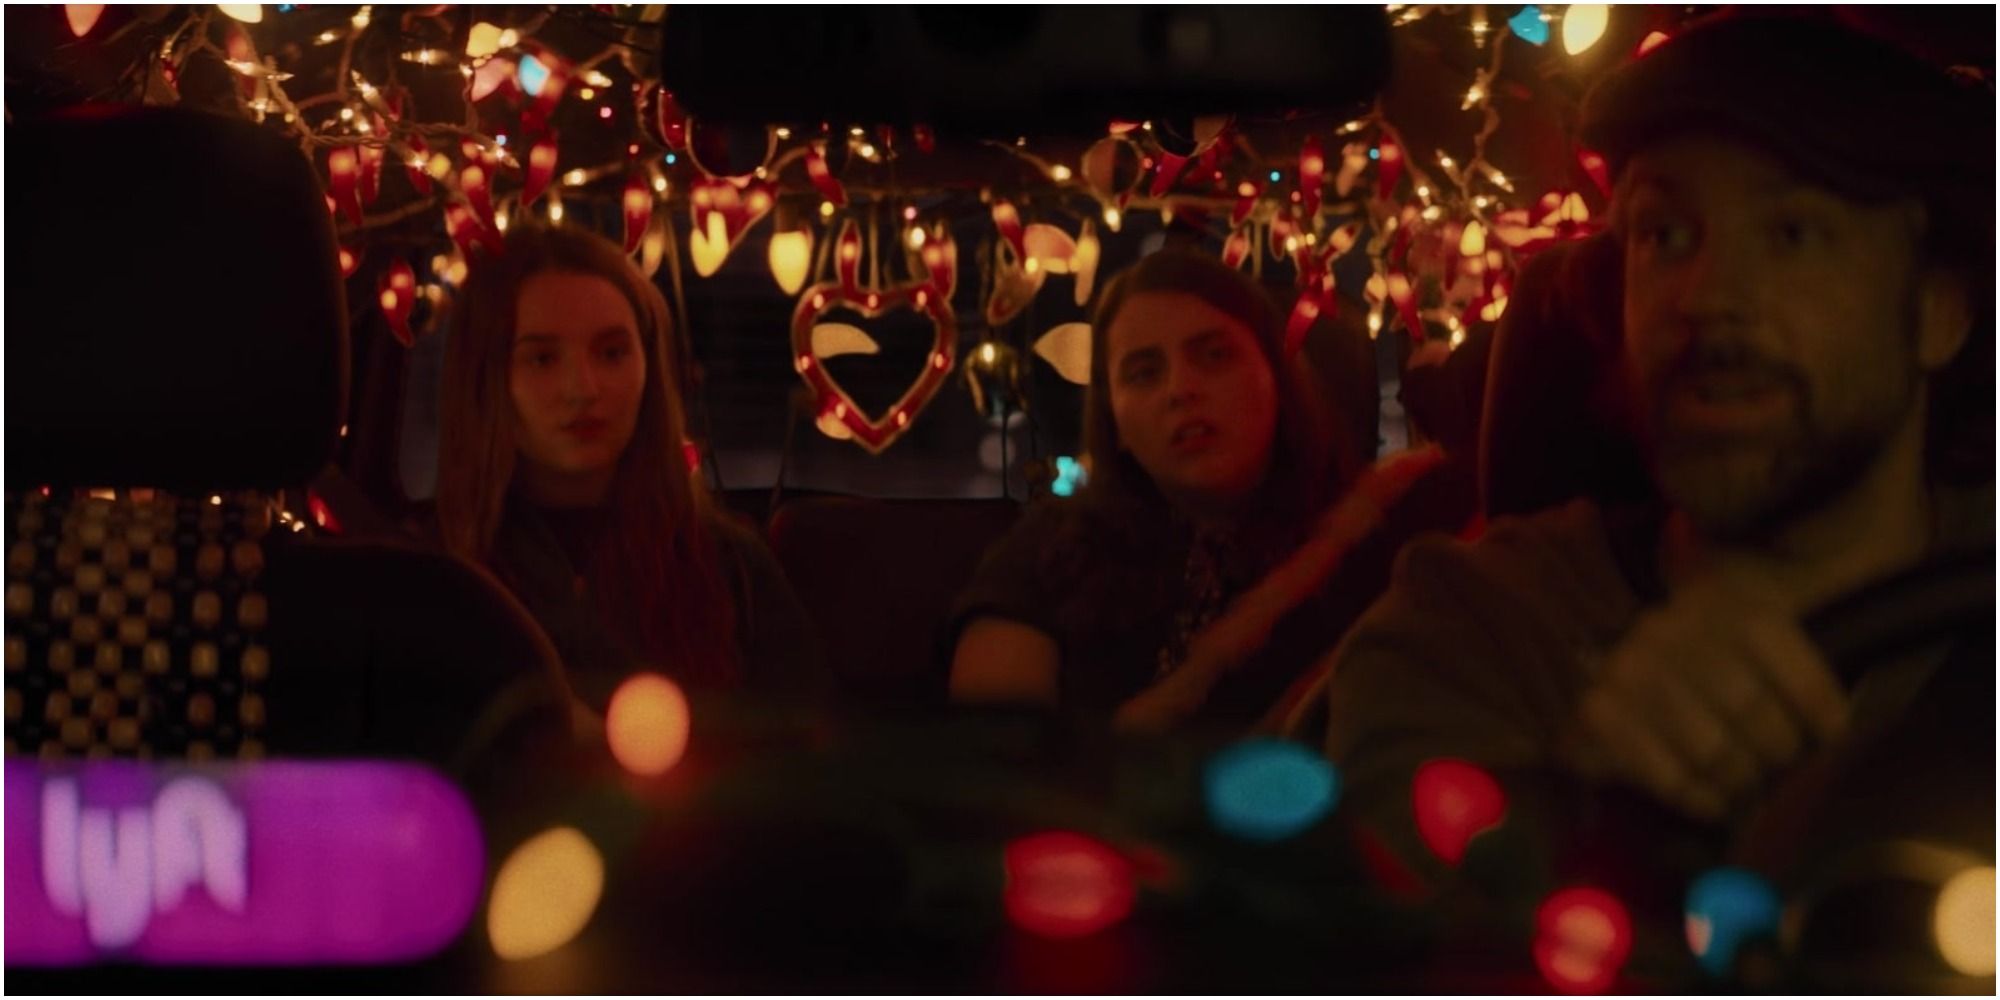 Booksmart 5 Scenes That Made Us Laugh Out Loud (& 5 That Hit Us In The Feels)